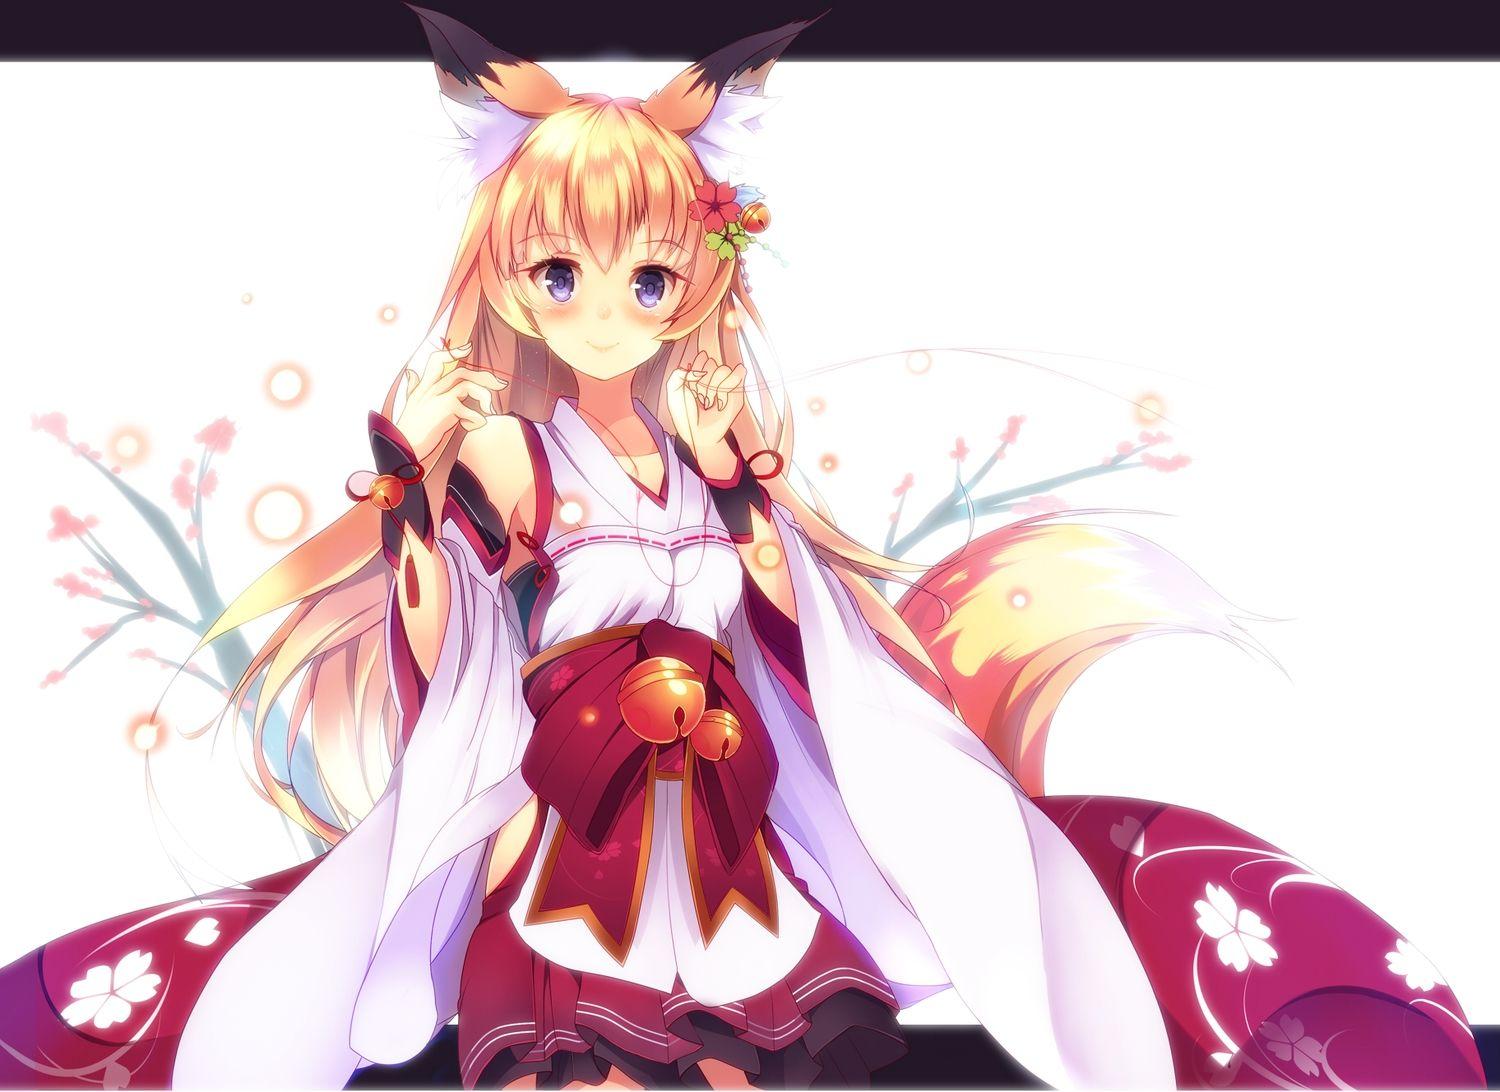 A kitsune (fox spirit) with a red thread, which leads to her